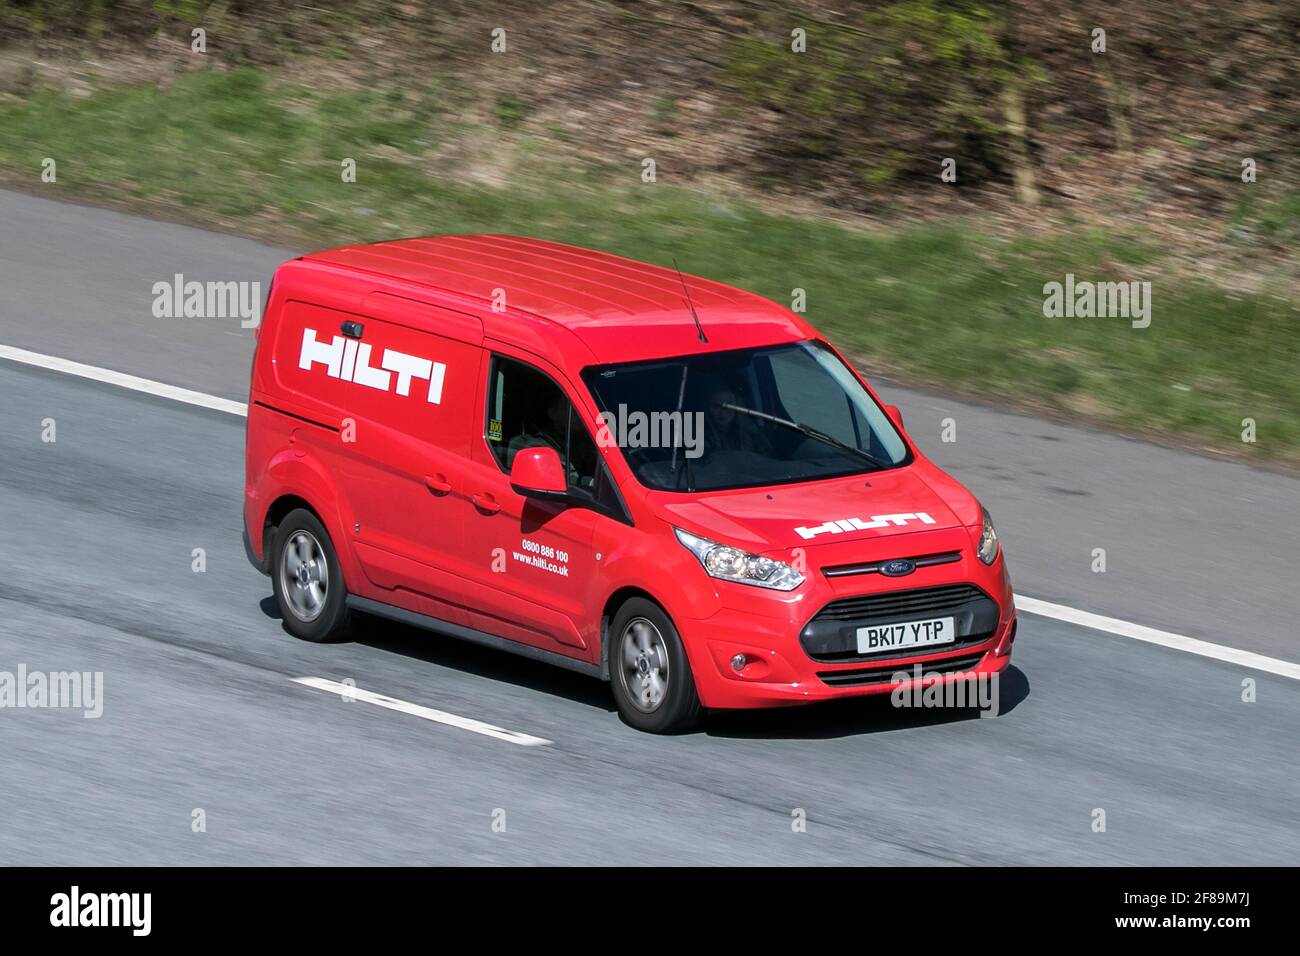 Hilti power tools service ford transit connect van driving on the M6 motorway near Preston in Lancashire, UK. Stock Photo